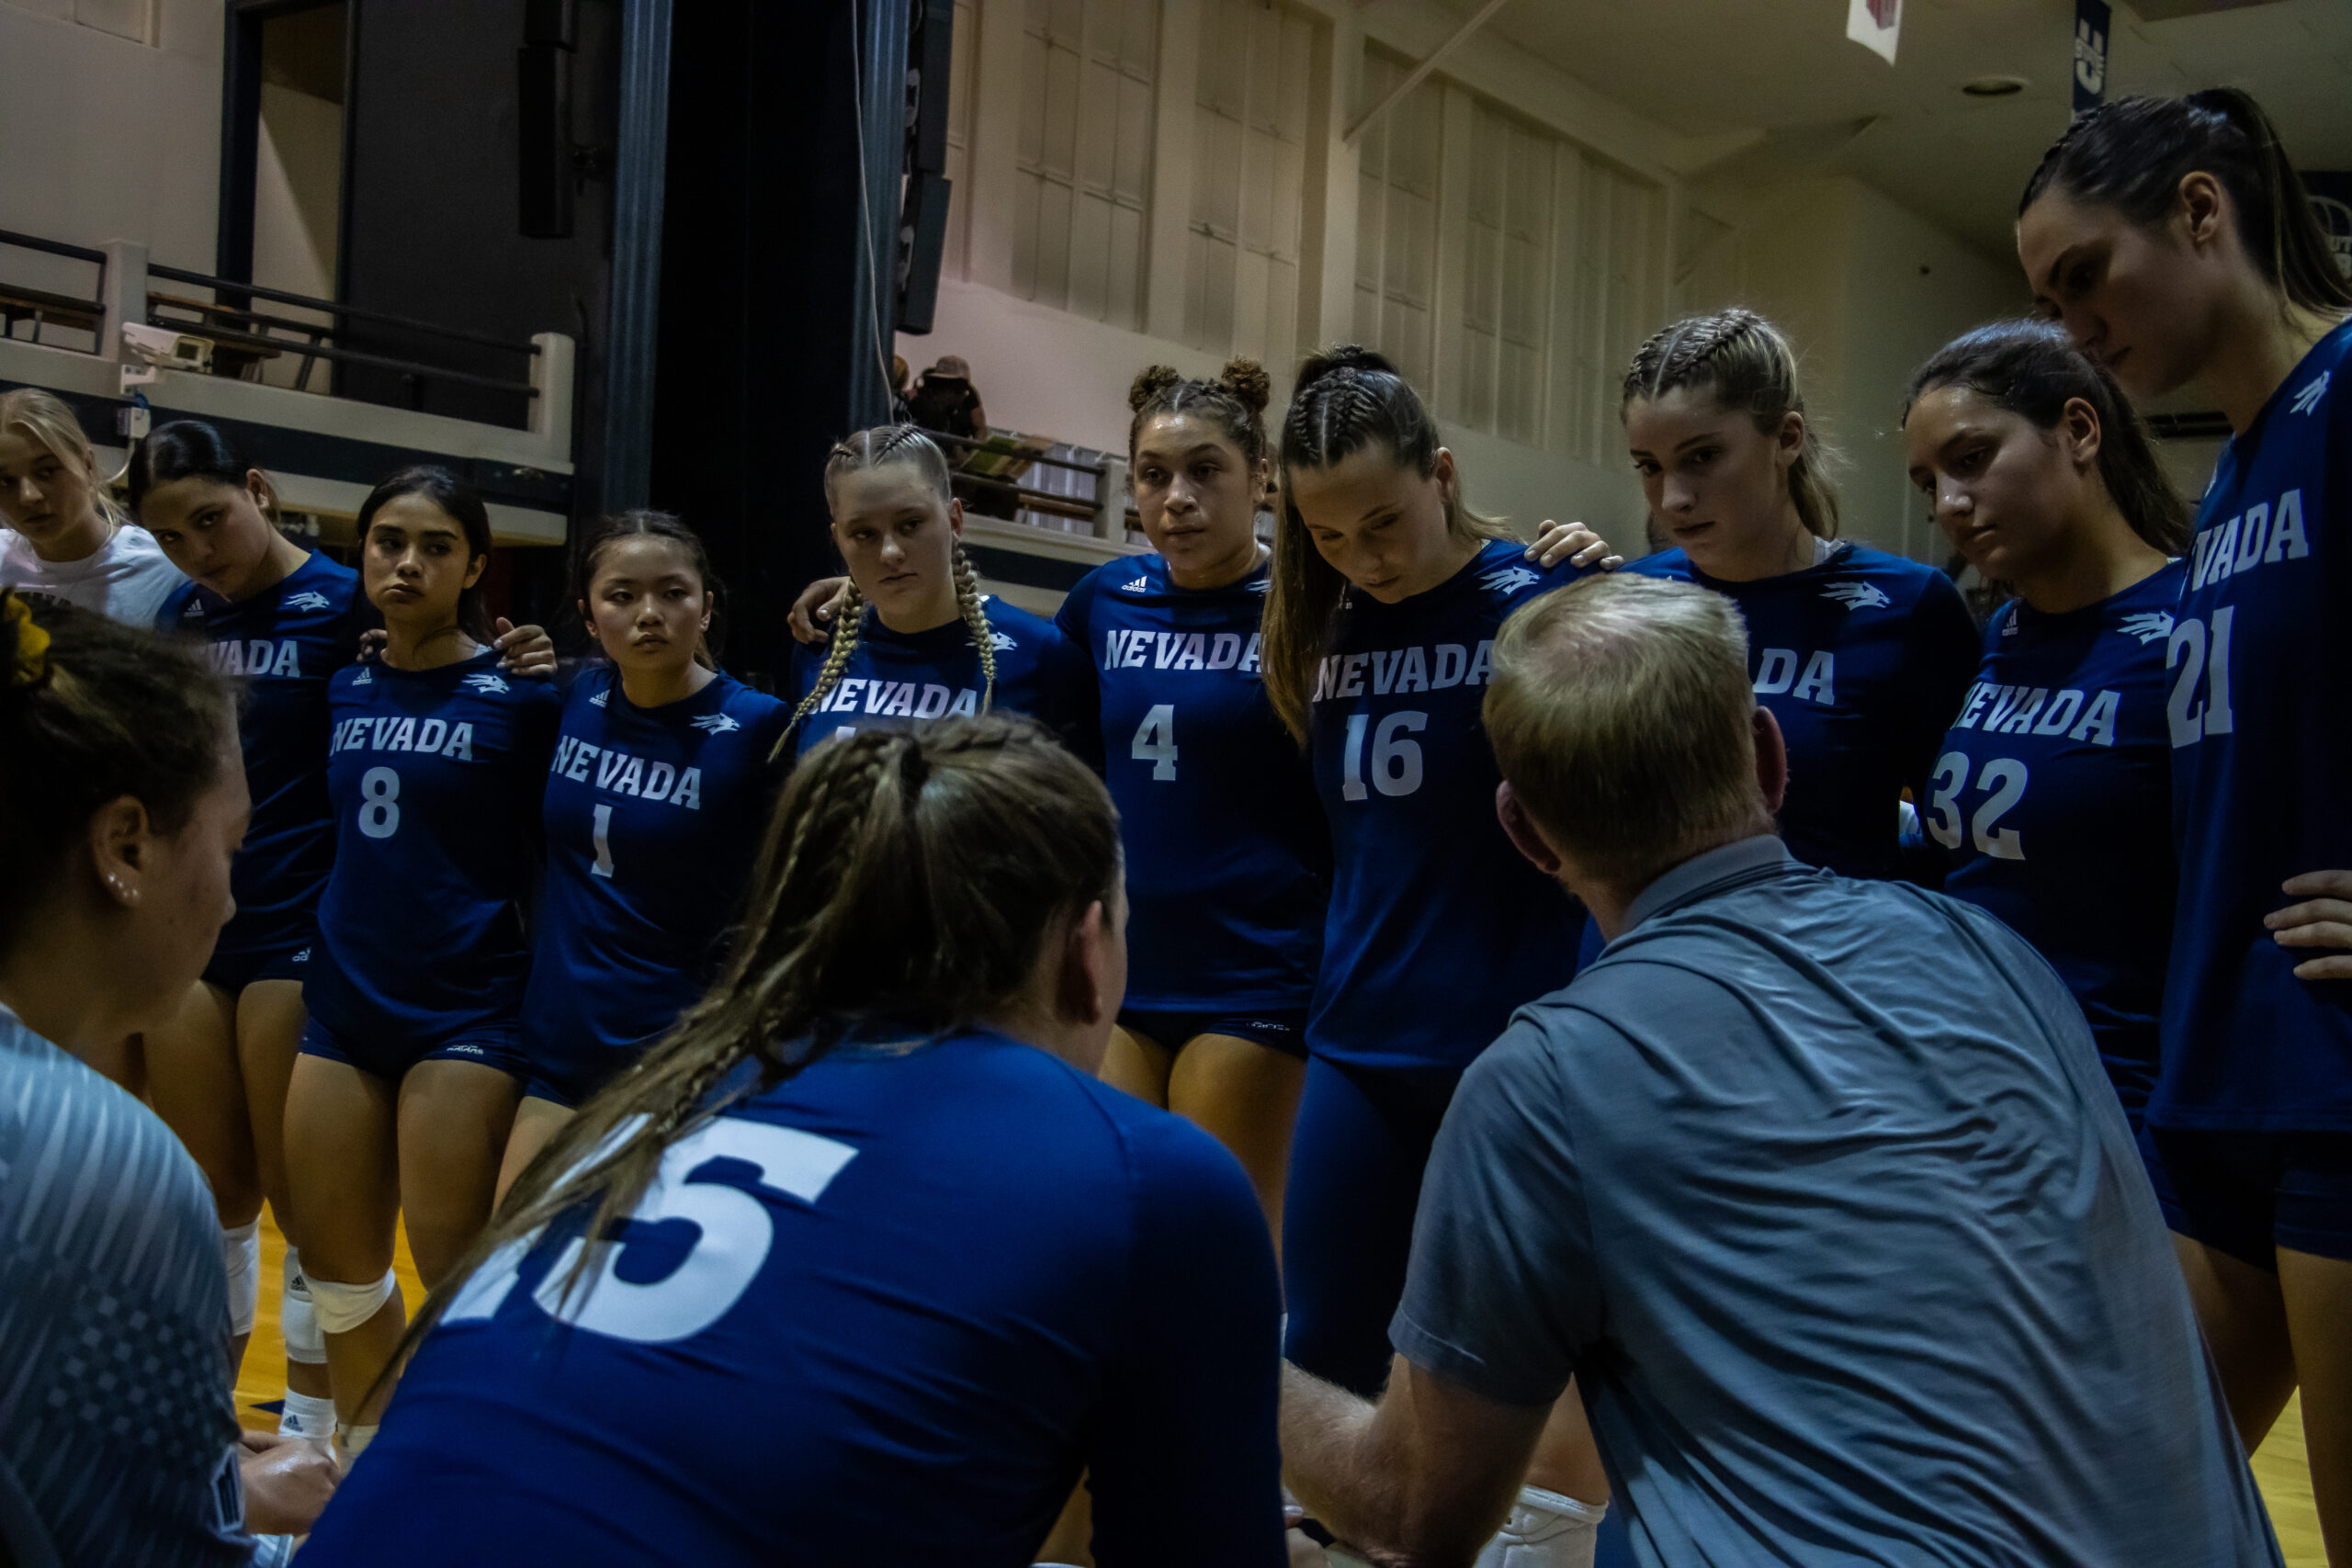 Nevada Volleyball falls to Air Force 0-3 in second conference game in the VSG